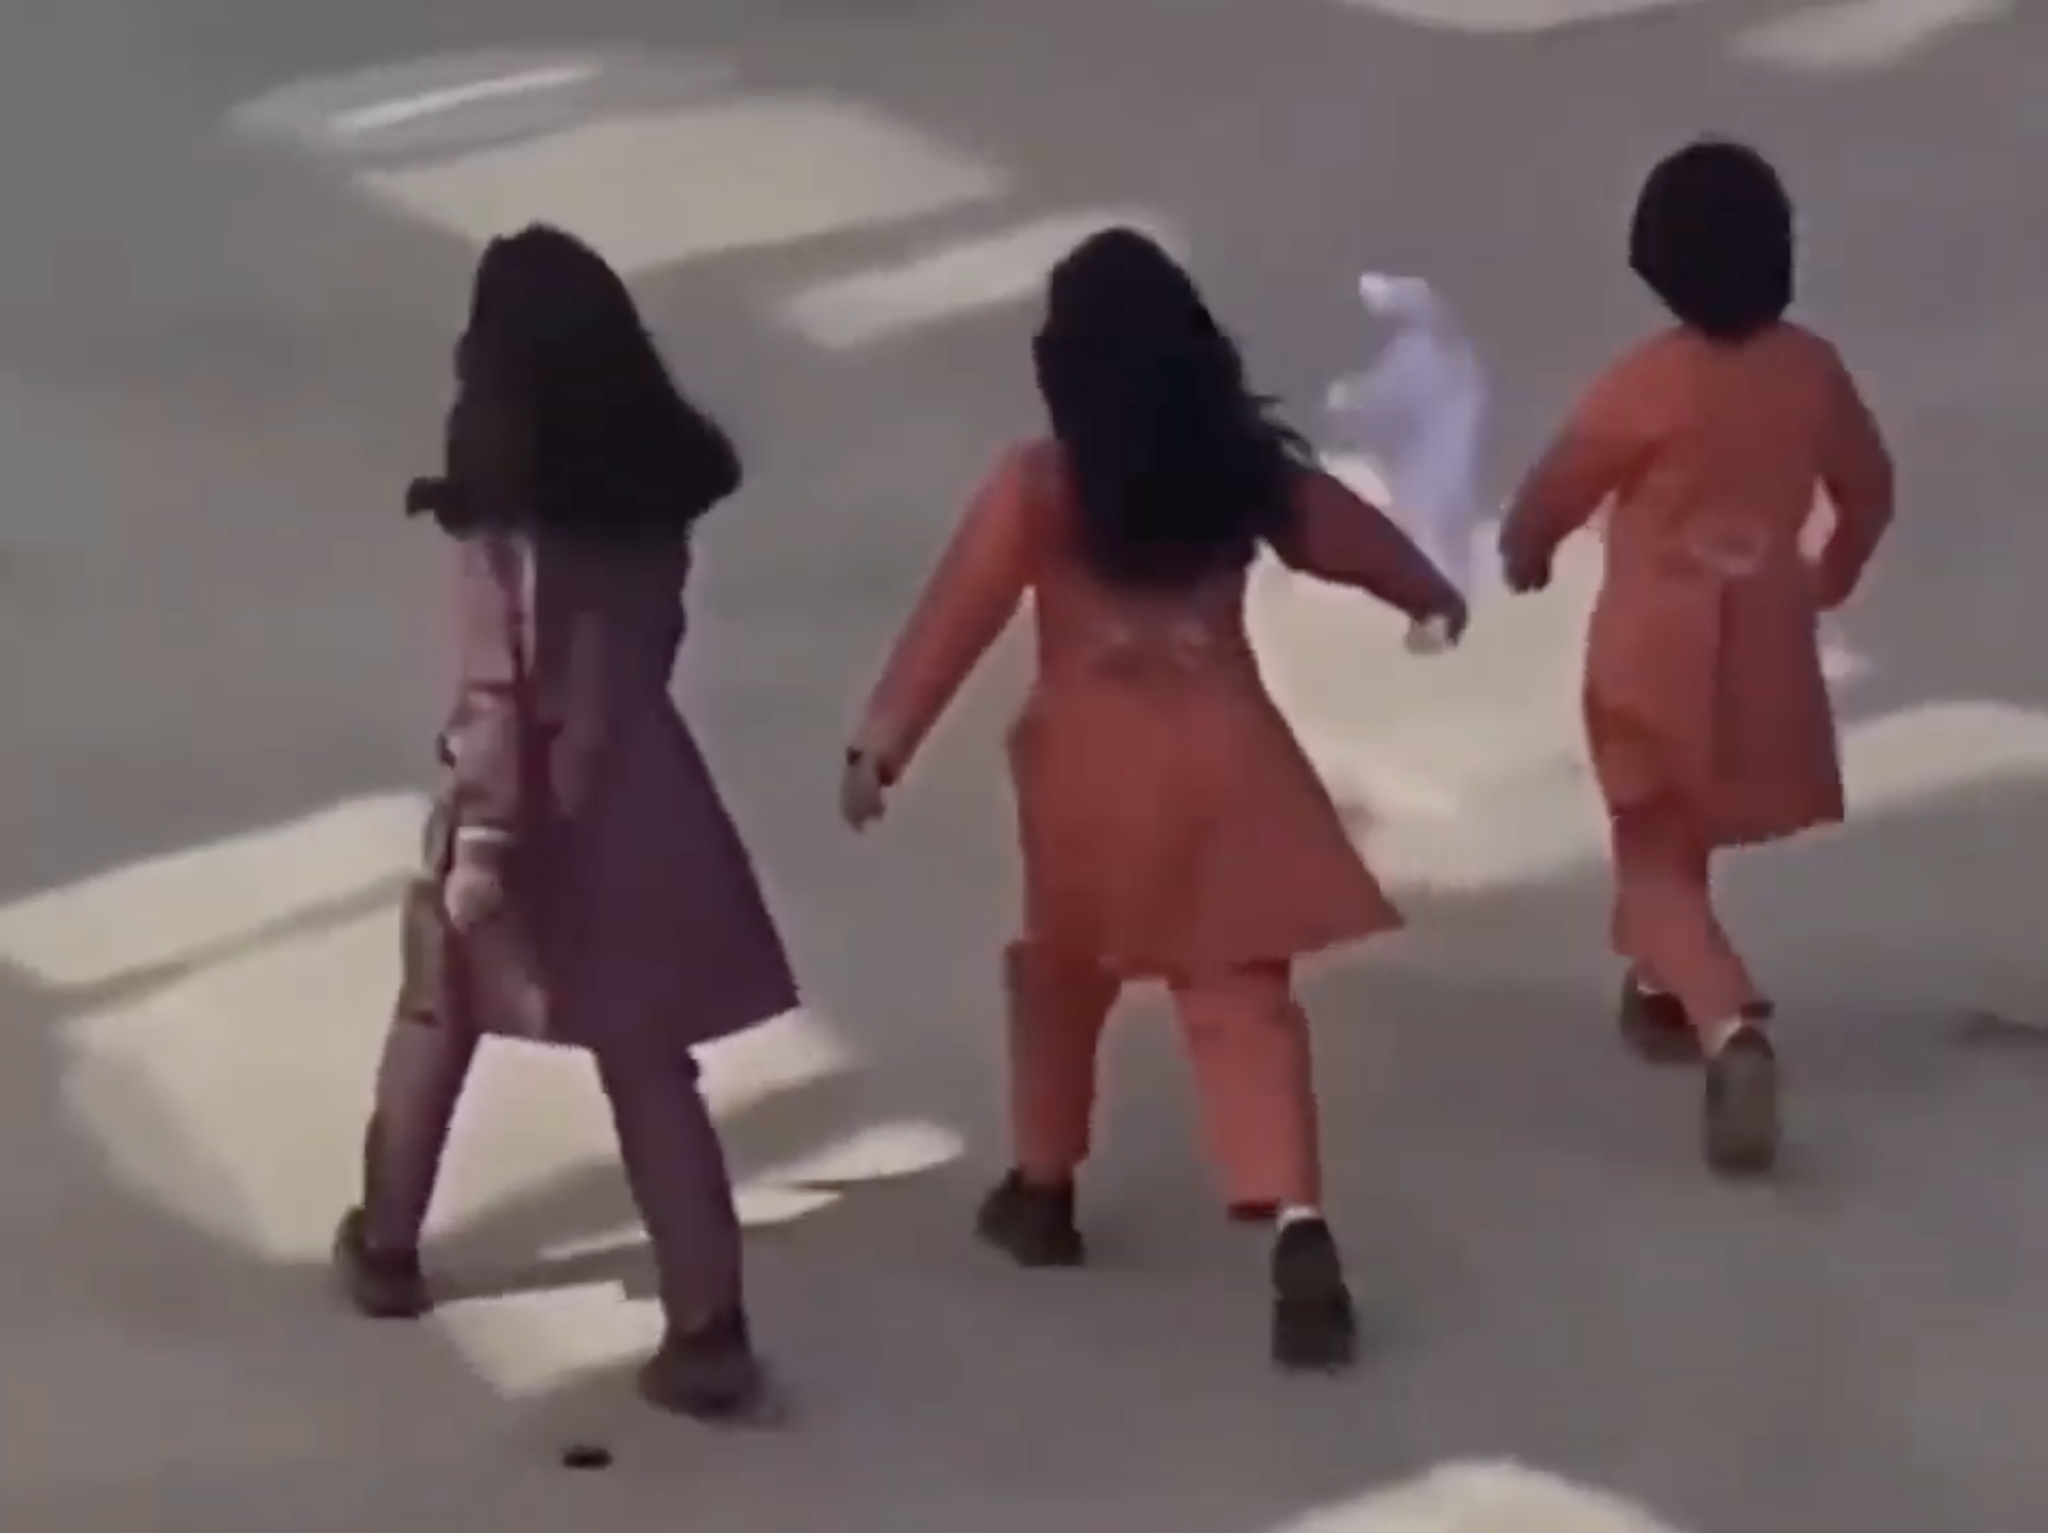 Pictured are three Iranian girls, the photo taken from a distance from behind. You see the three unveiled girls walking in a row, across the street, defying the Hijab Laws in Iran. They seem to be walking to school.